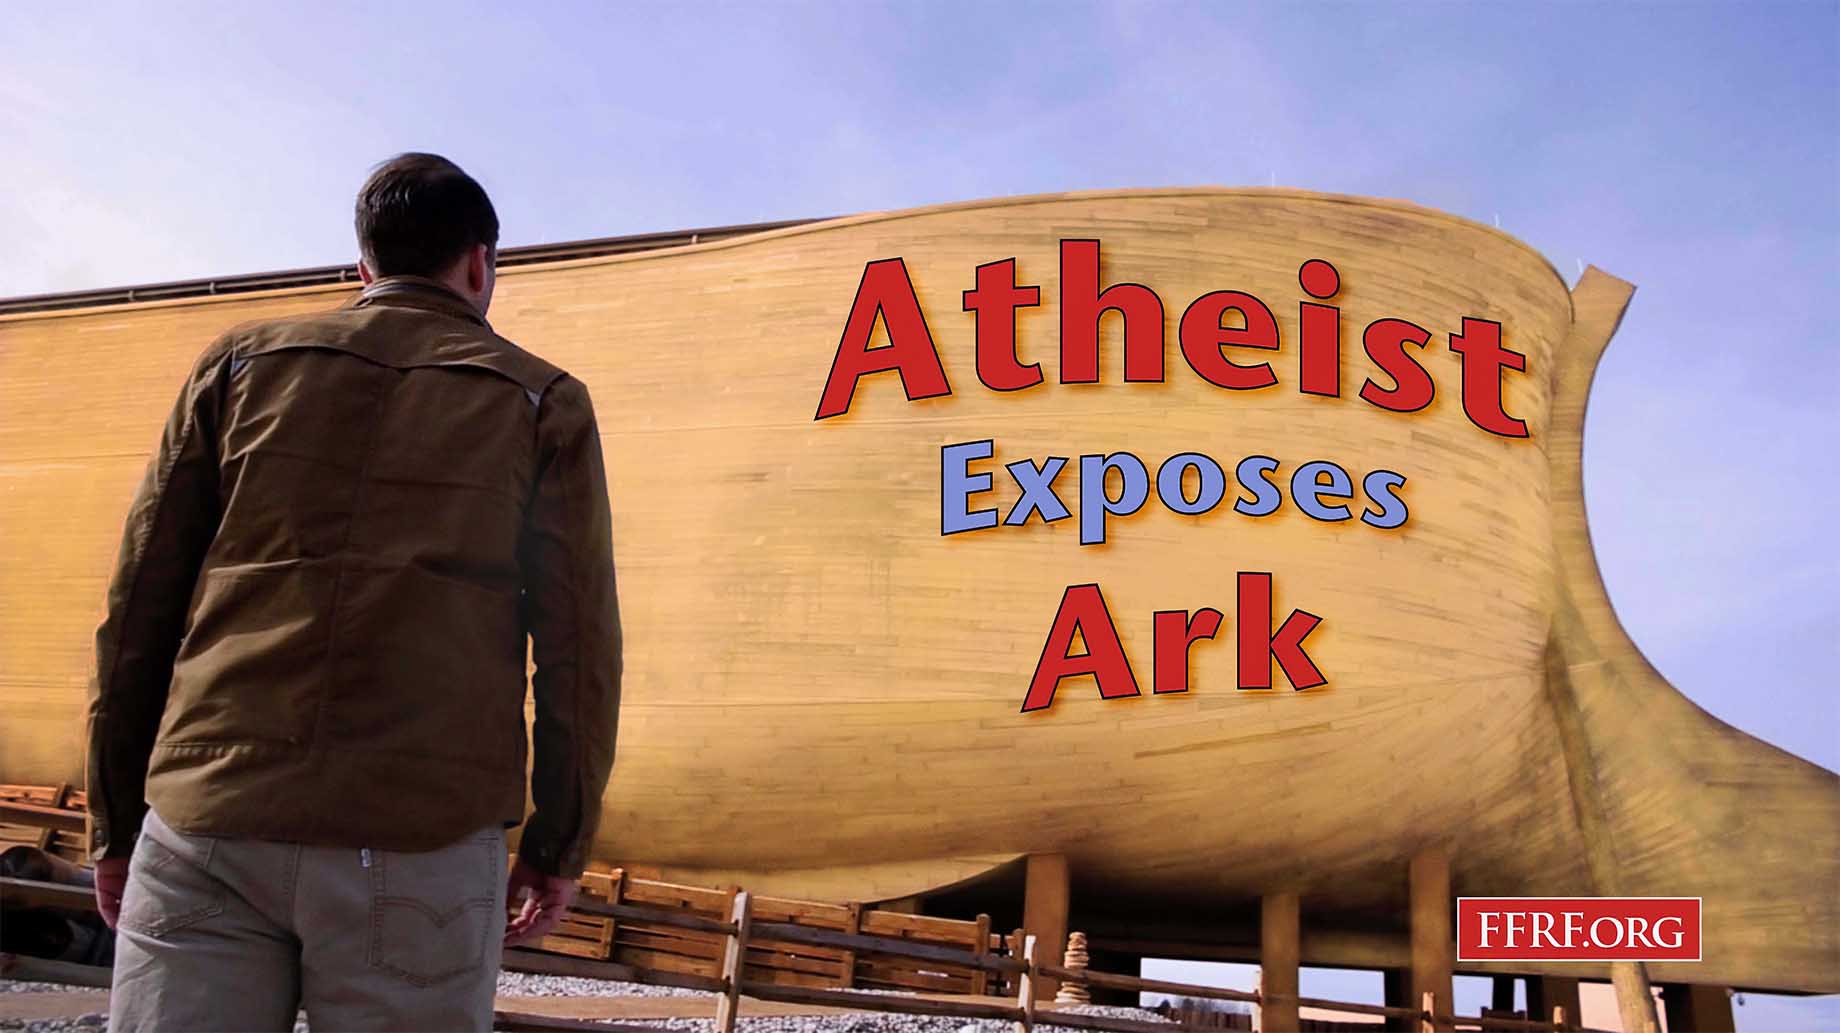 An atheist shoots a commercial at creationist Ken Ham’s Ark Encounter